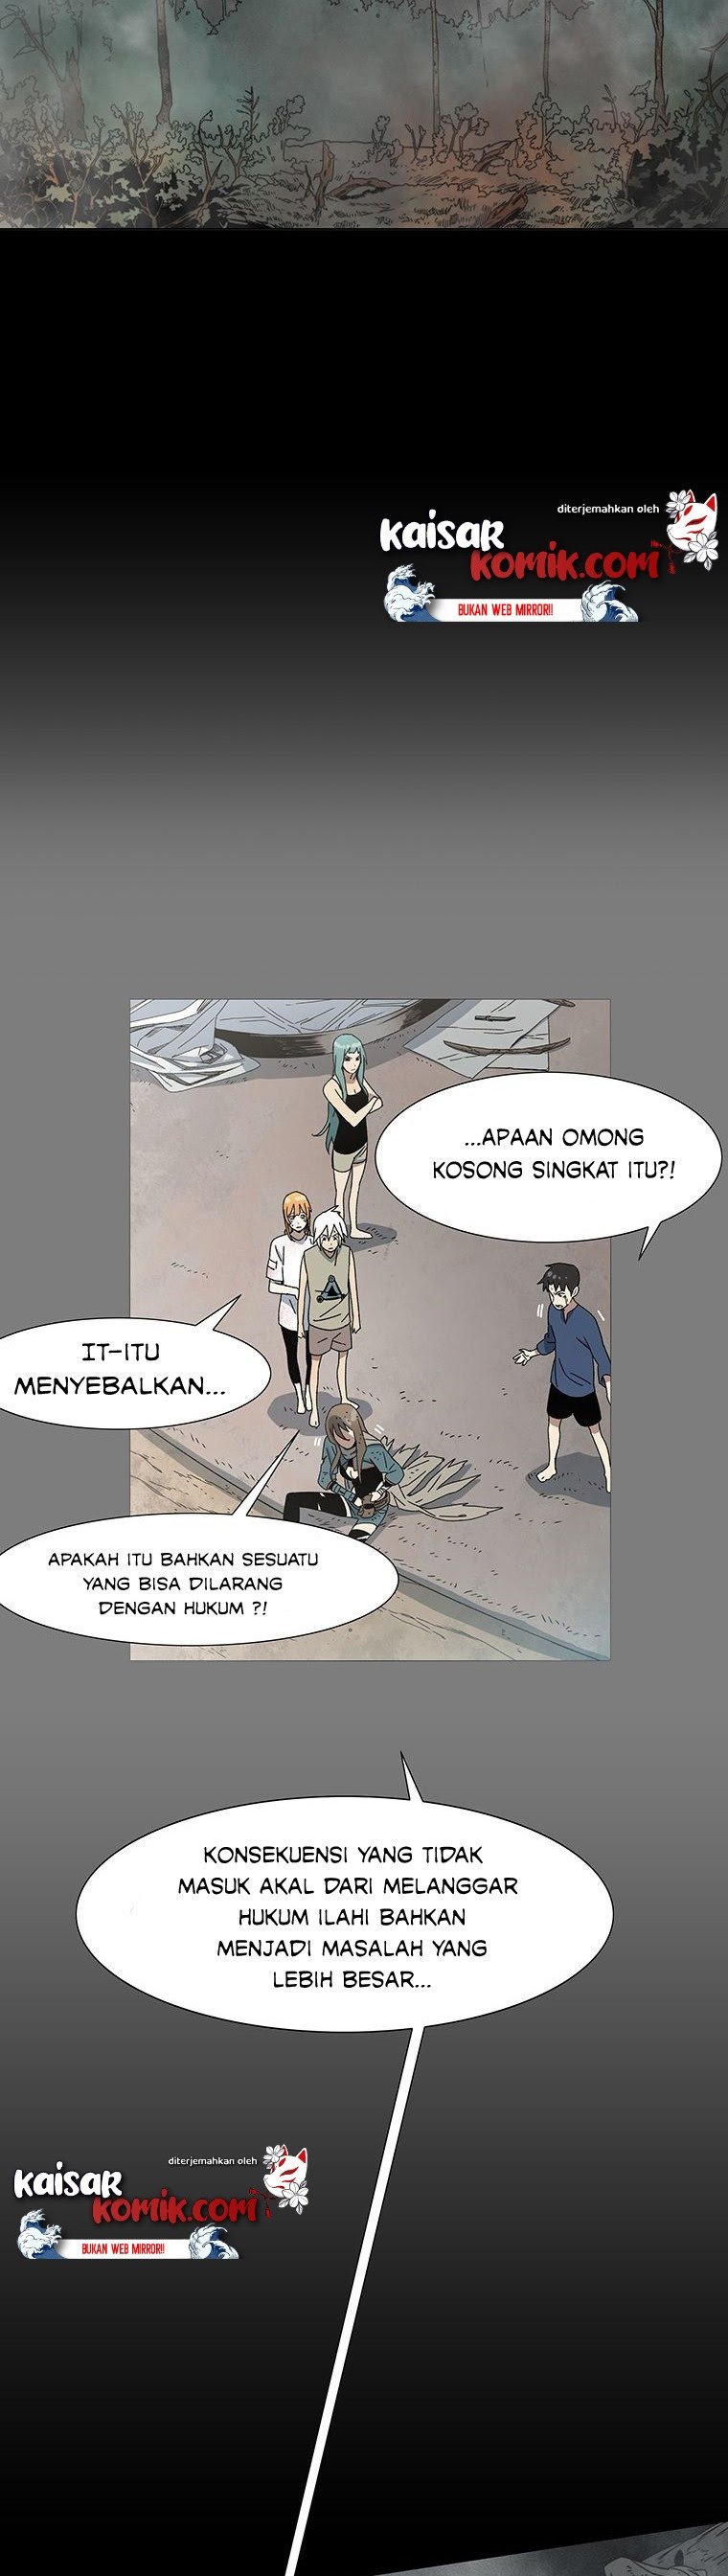 Trouble Chapter 03